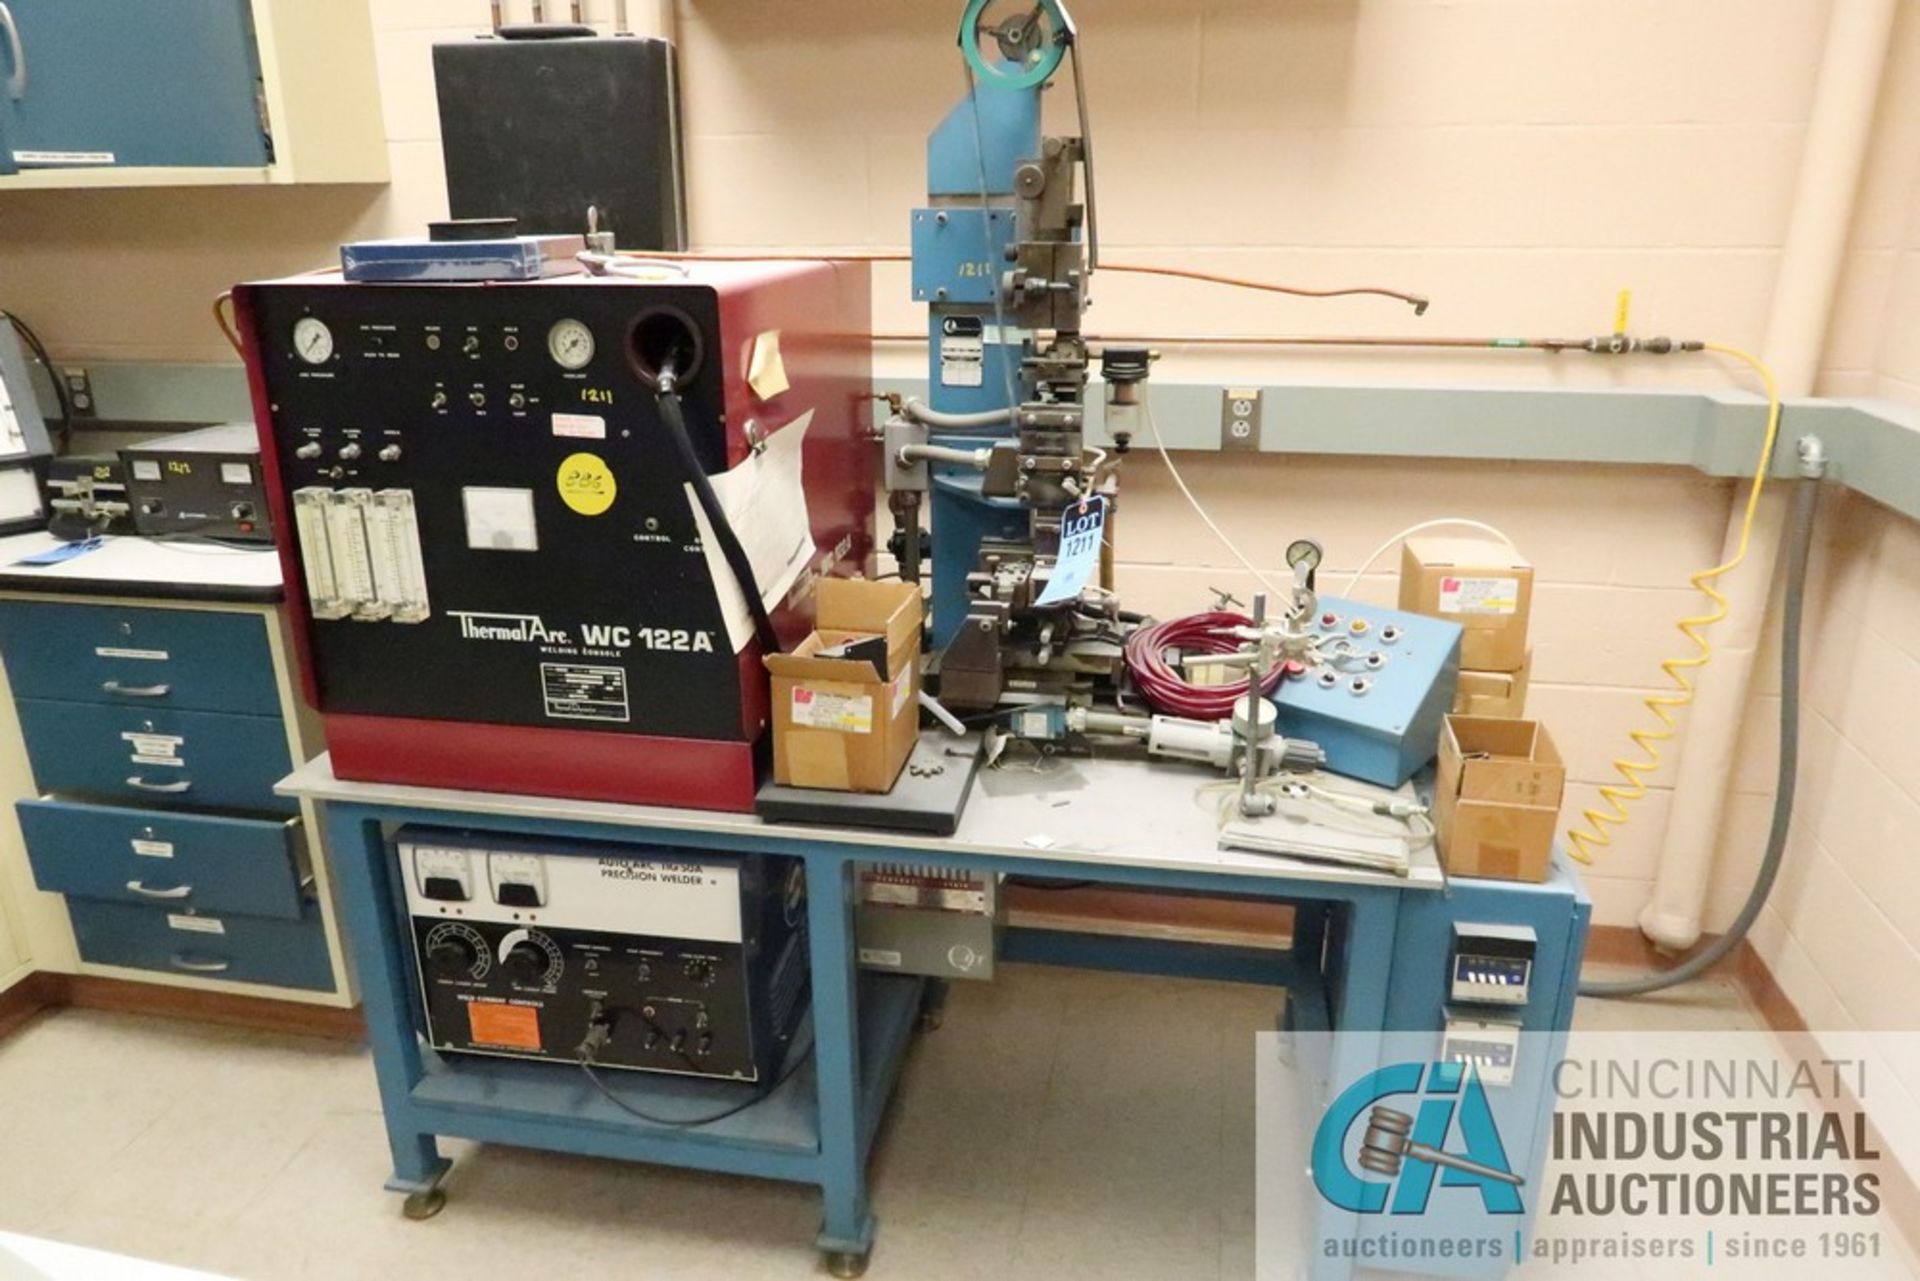 PRECISION RESISTANCE WELDING BENCH WITH THERMAL ARC 122A AND MILLER AUTO ARC TIG 50A POWER